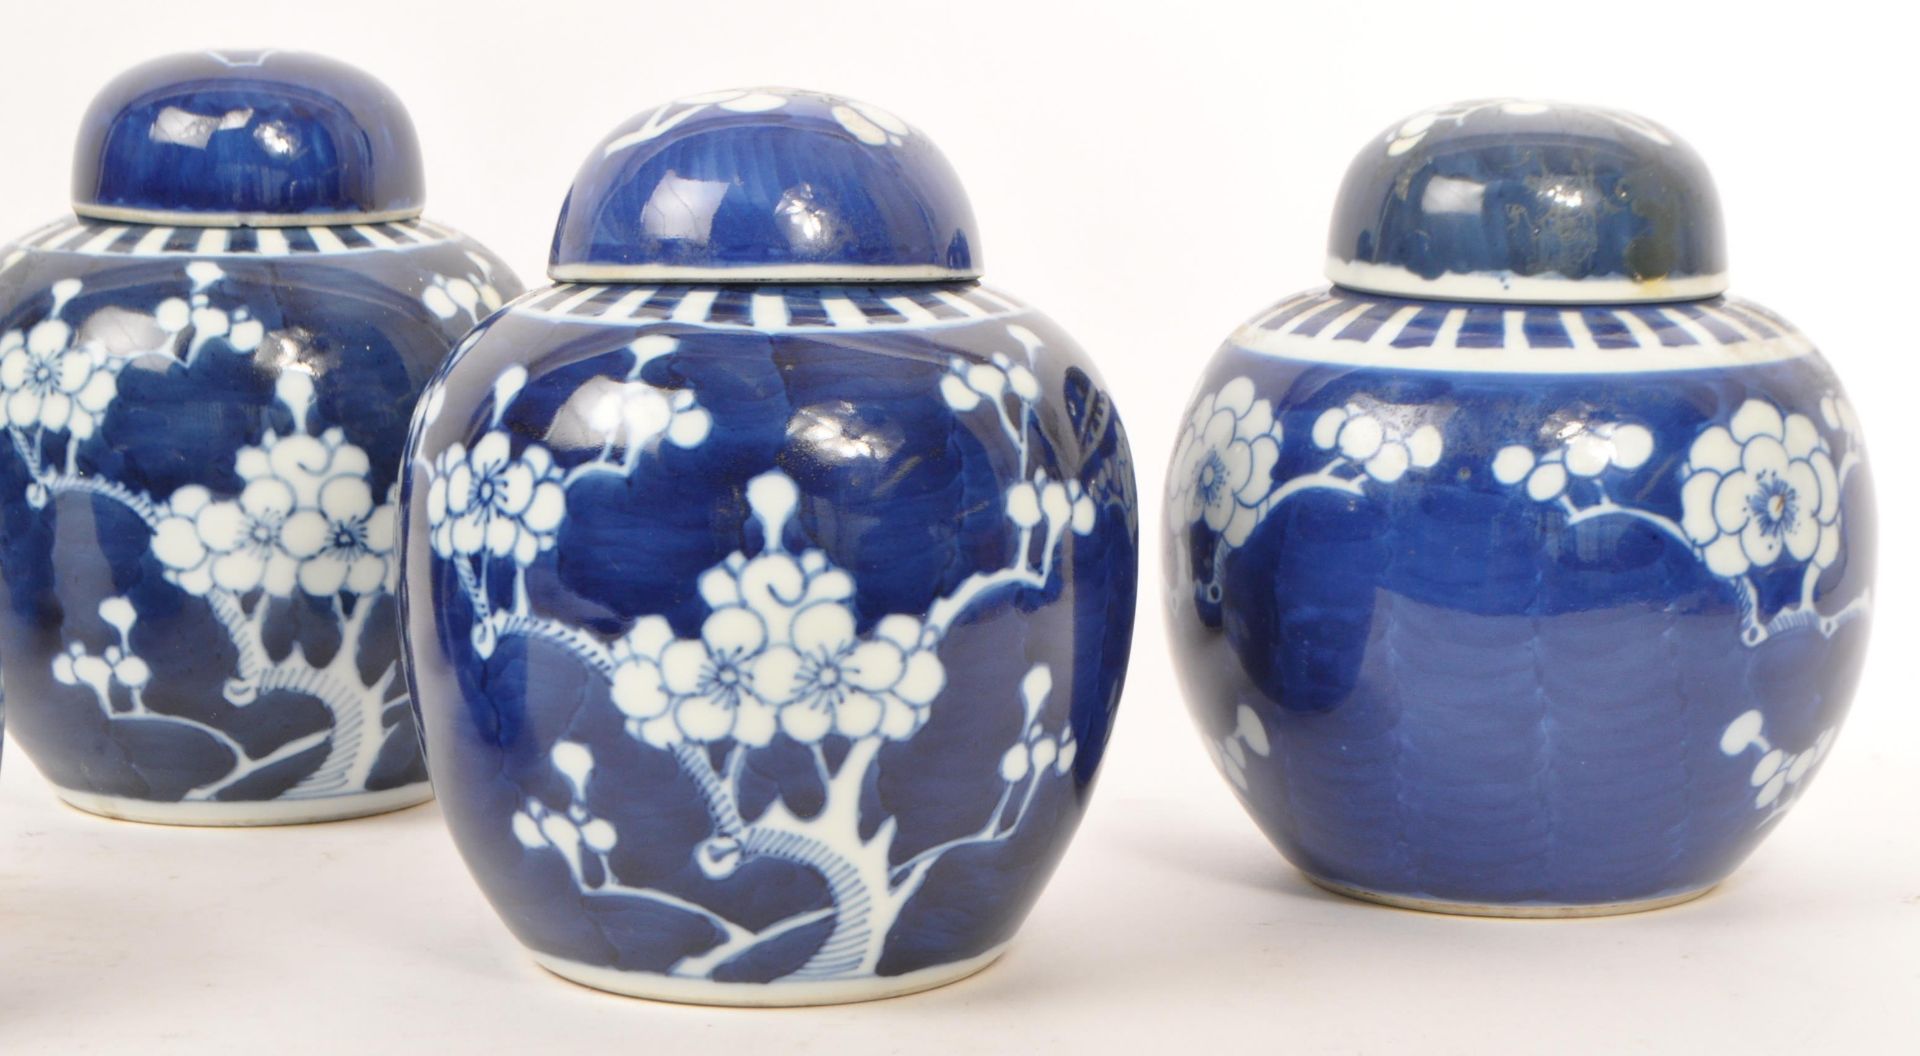 FIVE 19TH CENTURY & LATER CHINESE PORCELAIN PRUNUS GINGER JARS - Image 2 of 6